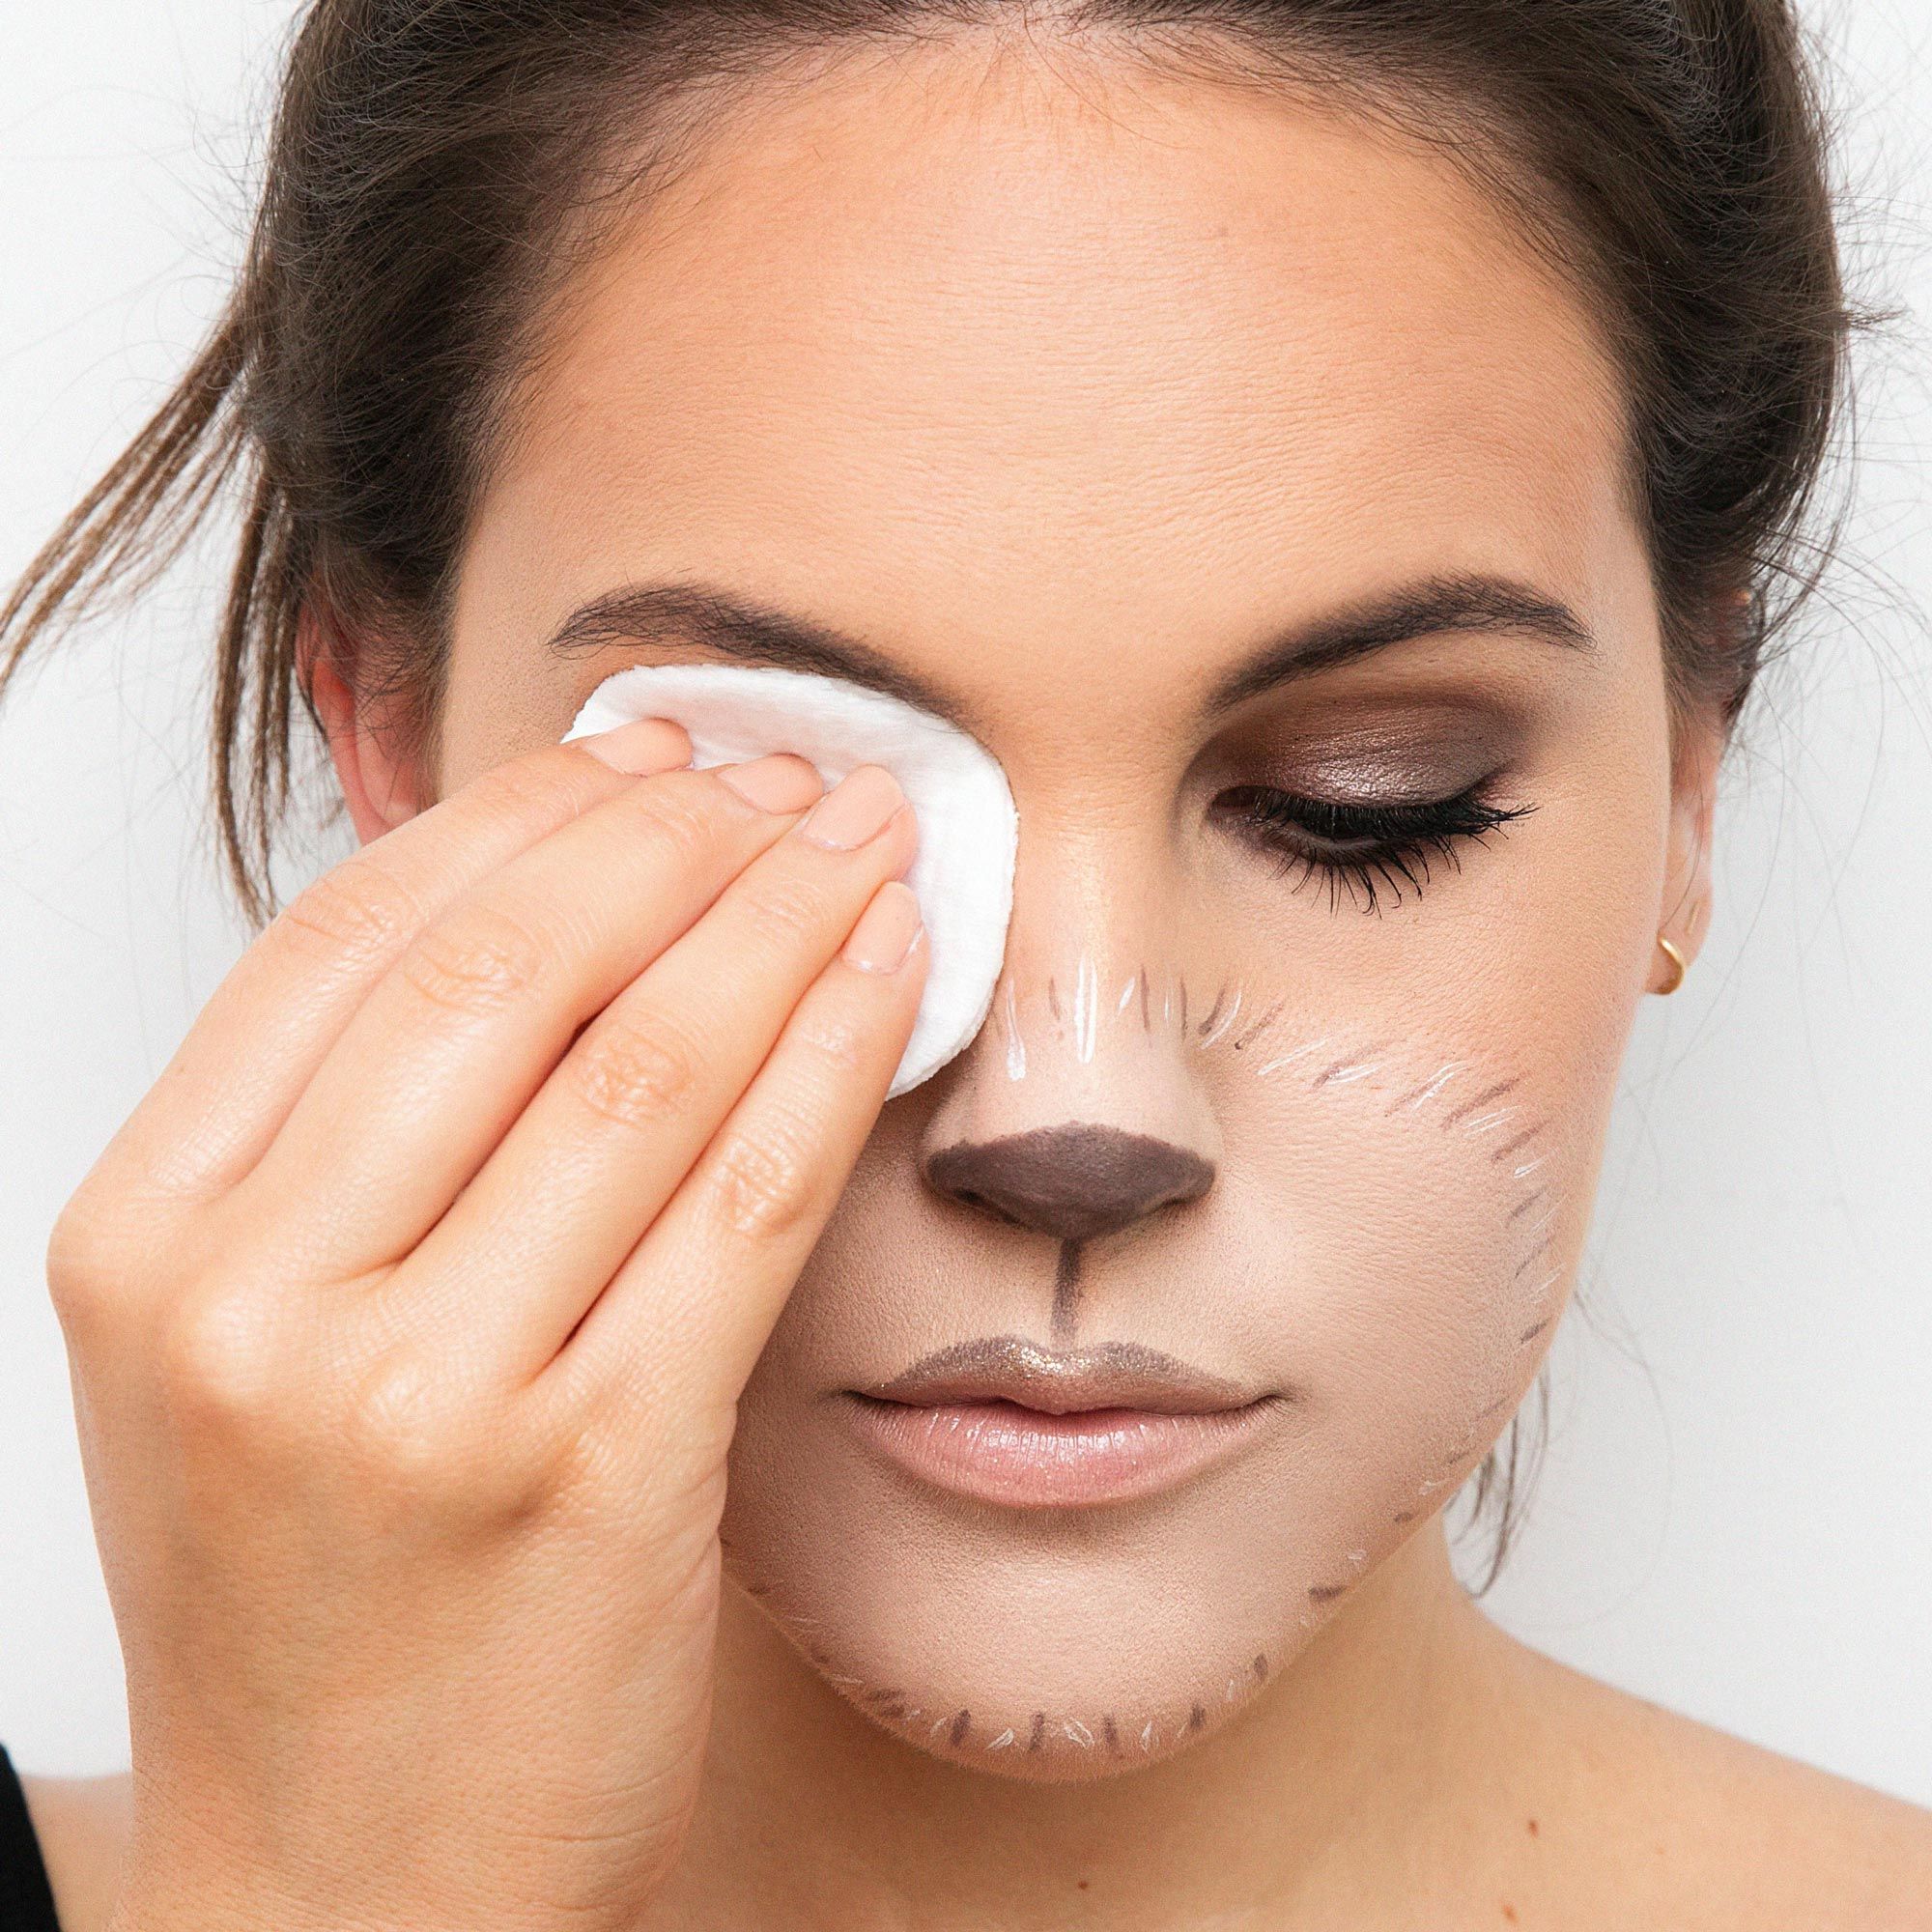 How to Easily Remove Halloween Makeup - Best Way to Take Off